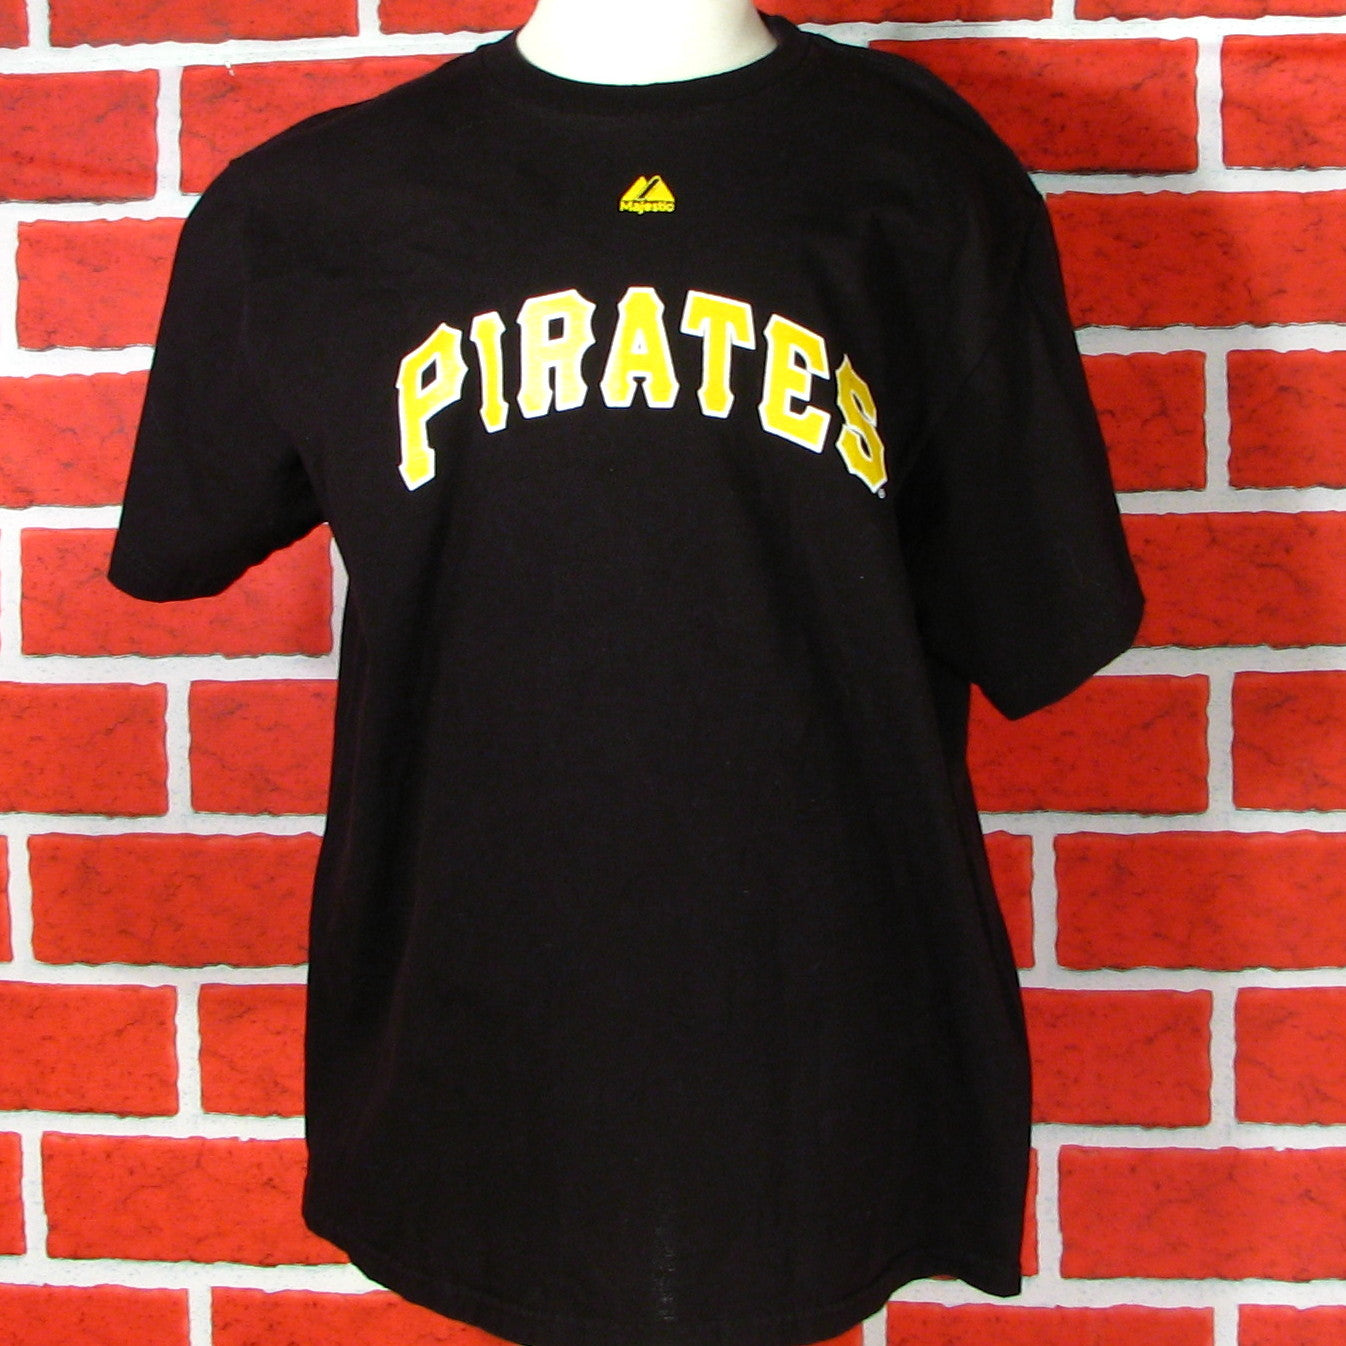 pittsburgh pirates red jersey